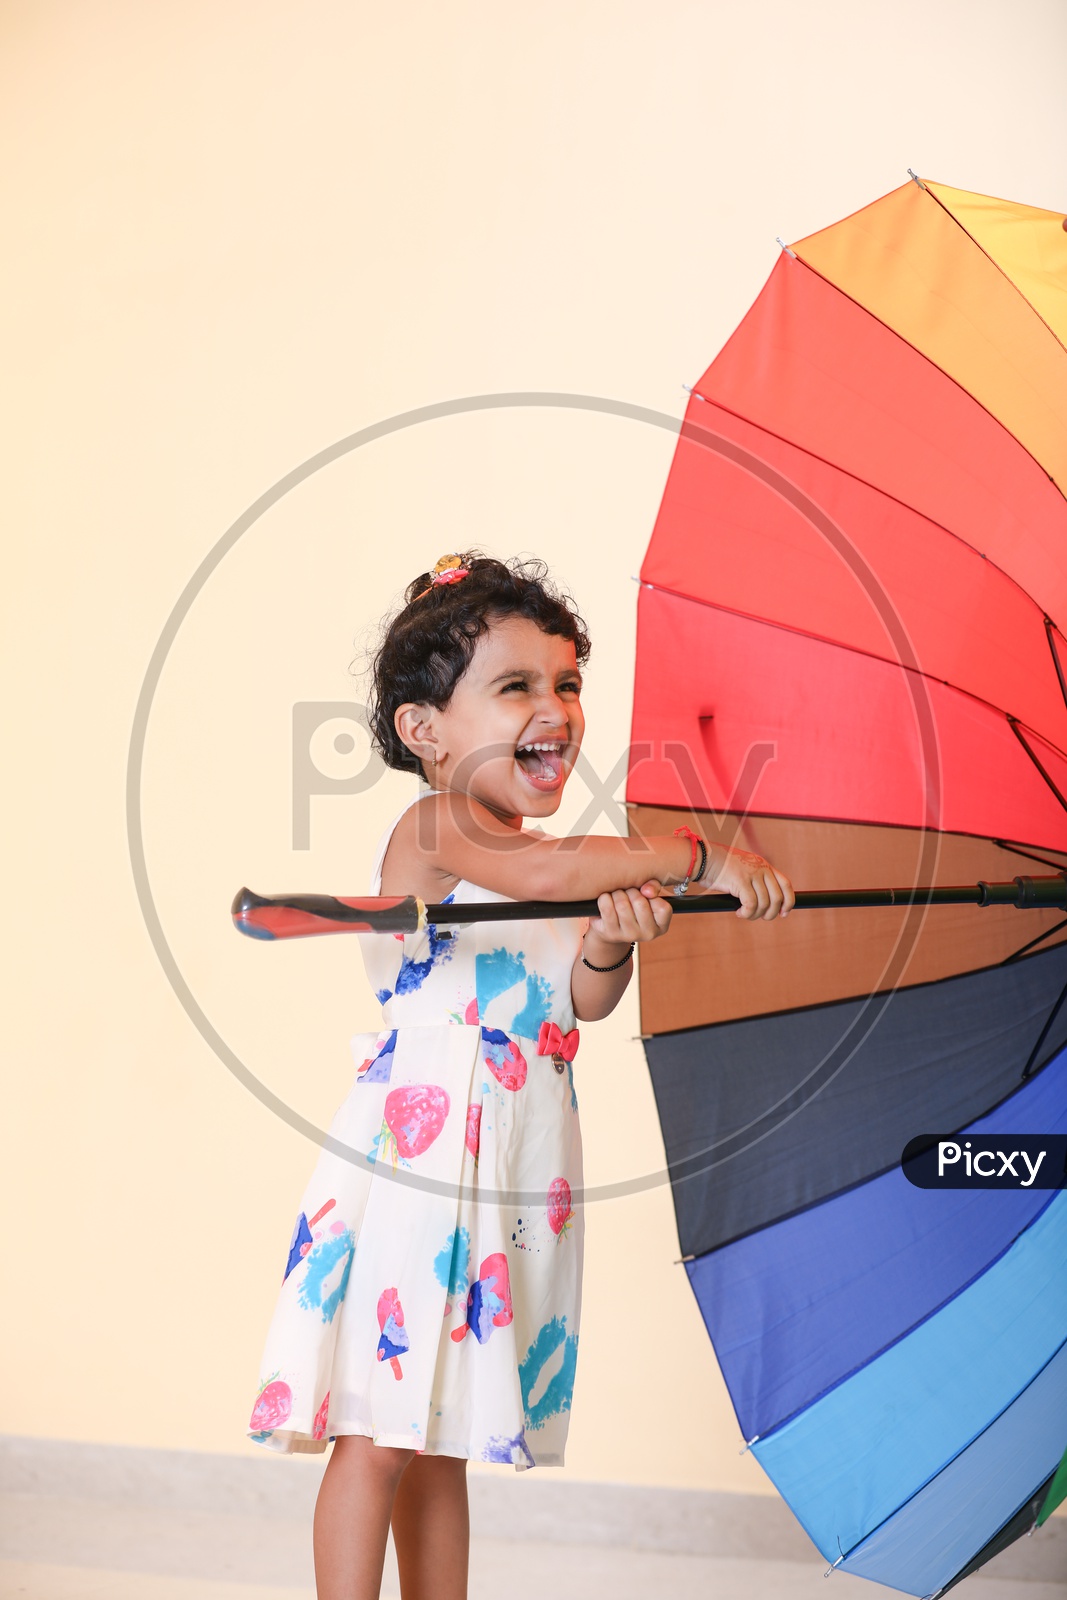 Indian girl dressed in colorful frock playing  with rainbow colored umbrella